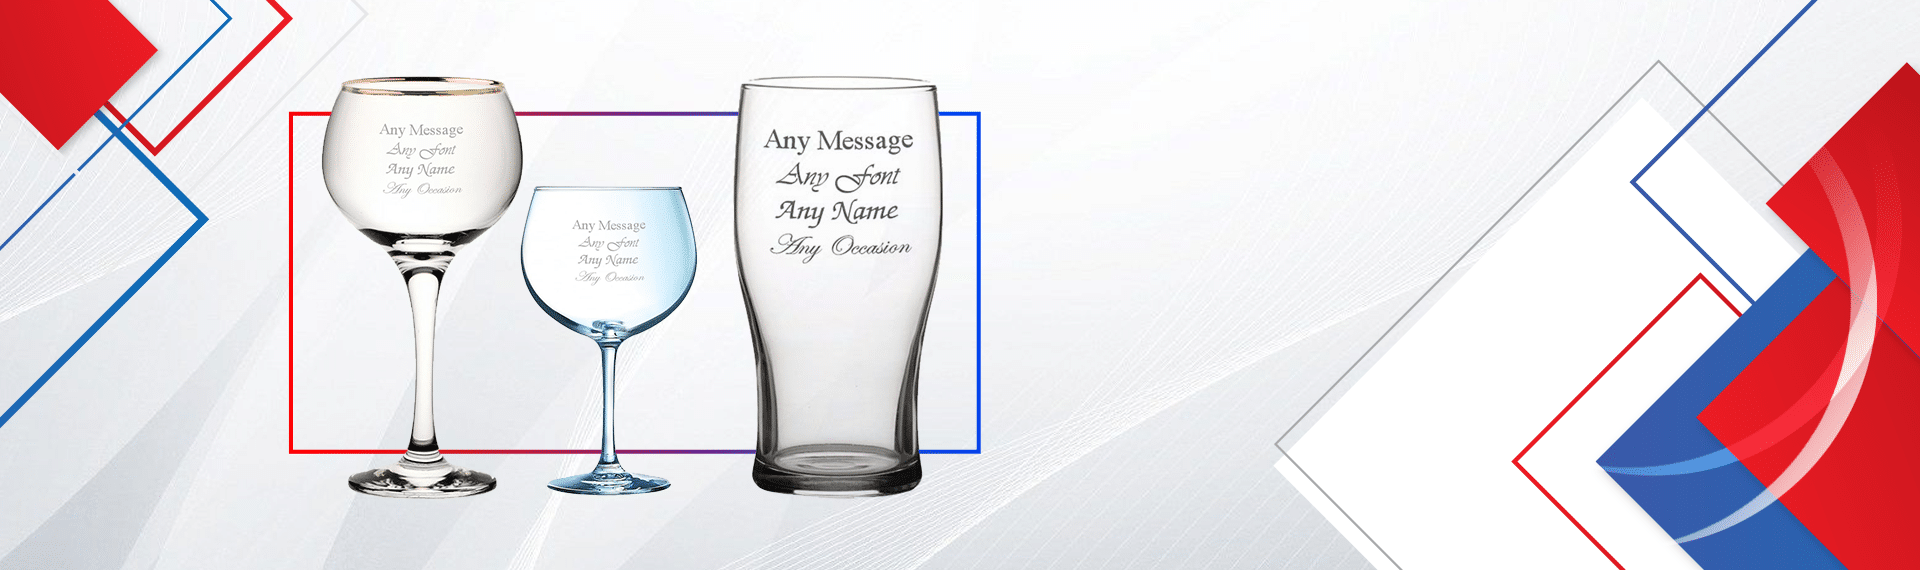 Personalised Engraved Football Perfect Pint Glass Personalise with Any Team Name Come On Curved Football Design with Gift Box